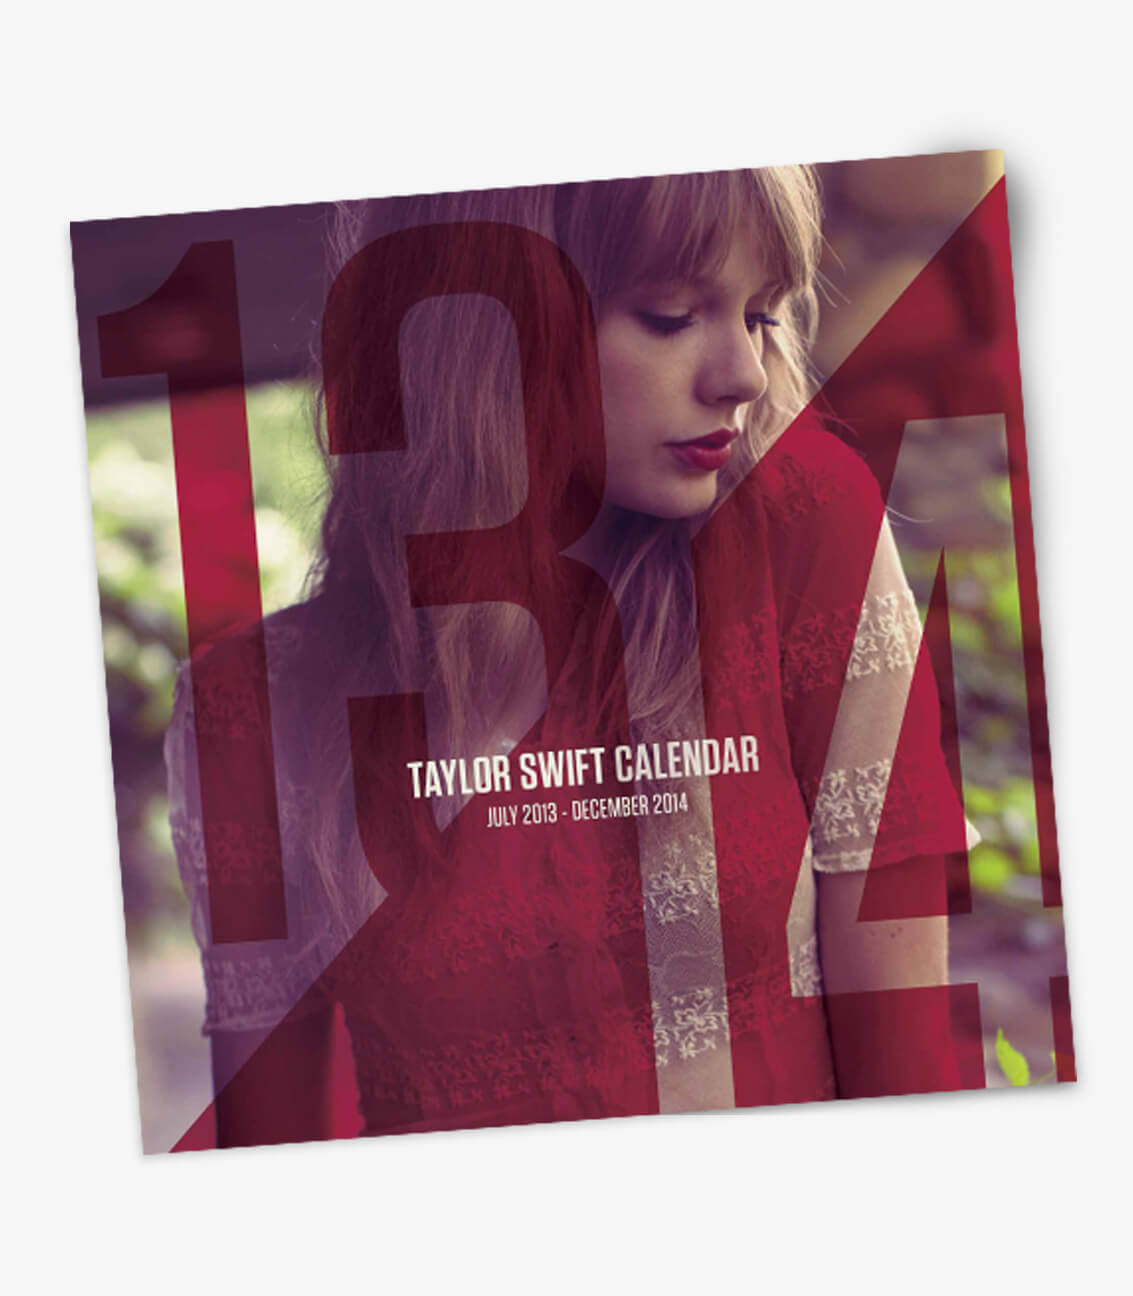 Red tour calendar cover design for Taylor Swift in Nashville, Tennessee